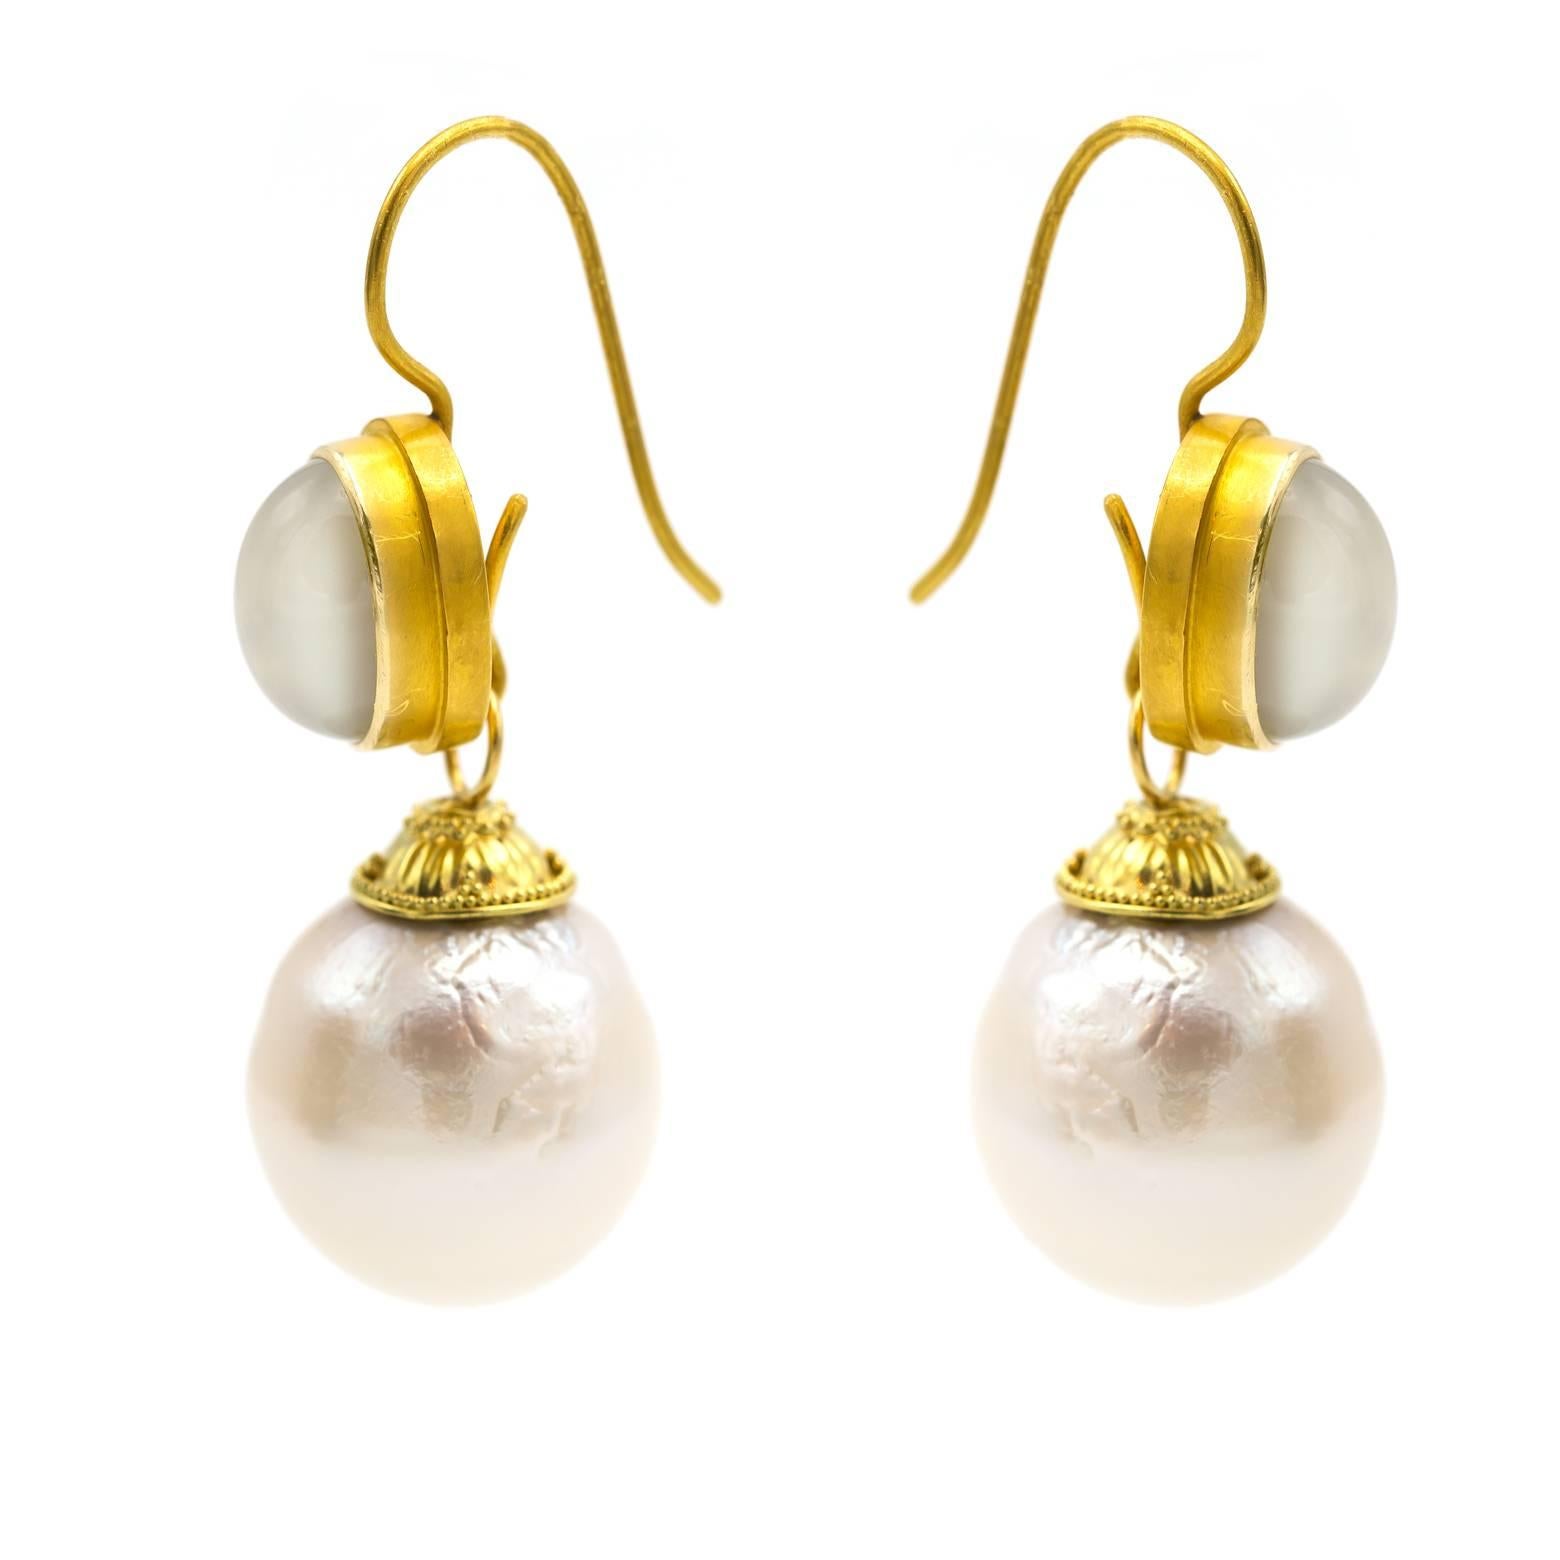 These gorgeous fresh water pearl earrings shine with a light pink and ocean blue reflection while hanging from ethereal moonstone. Gold plated silver adds a hand-dipped texture to these earrings with a Venusian and regal style fit for a goddess! 